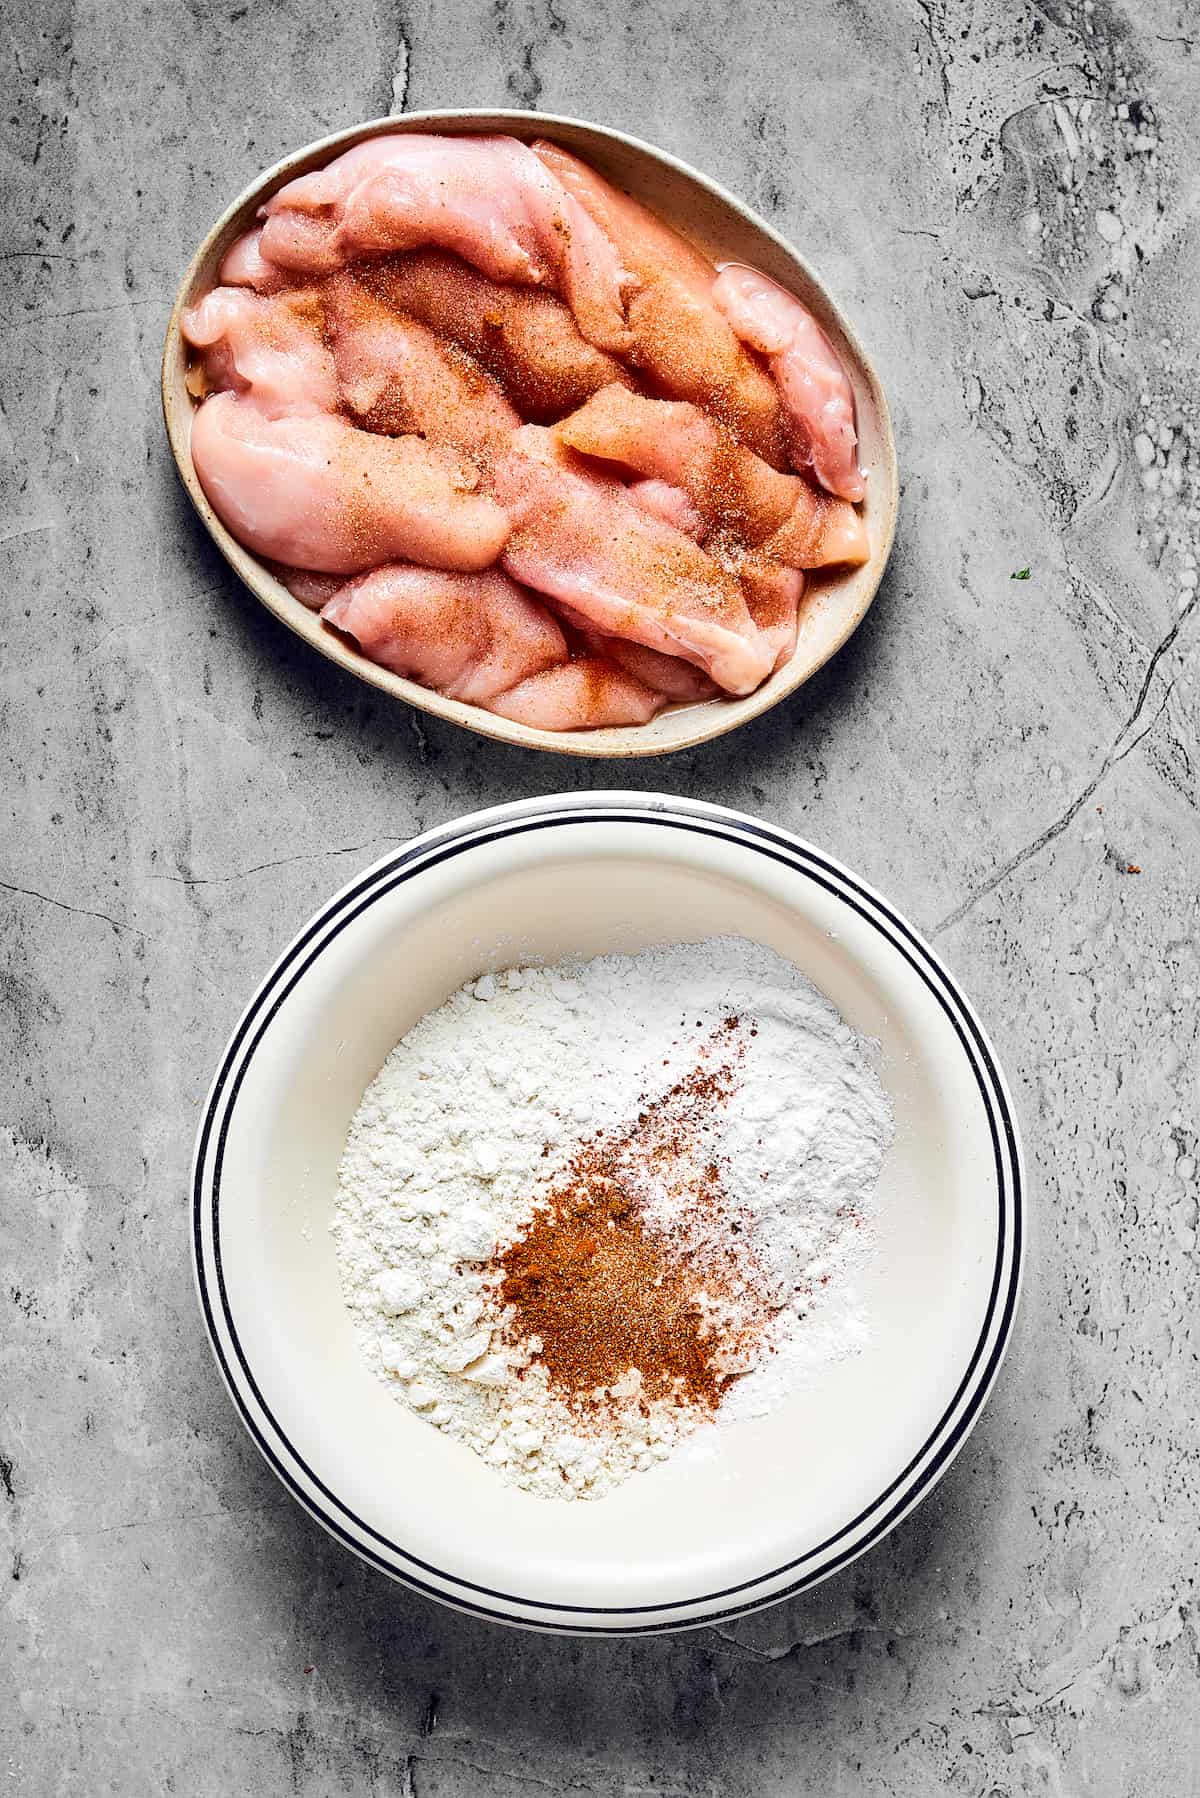 A dish of raw, seasoned chicken strips next to a bowl of seasoned flour.